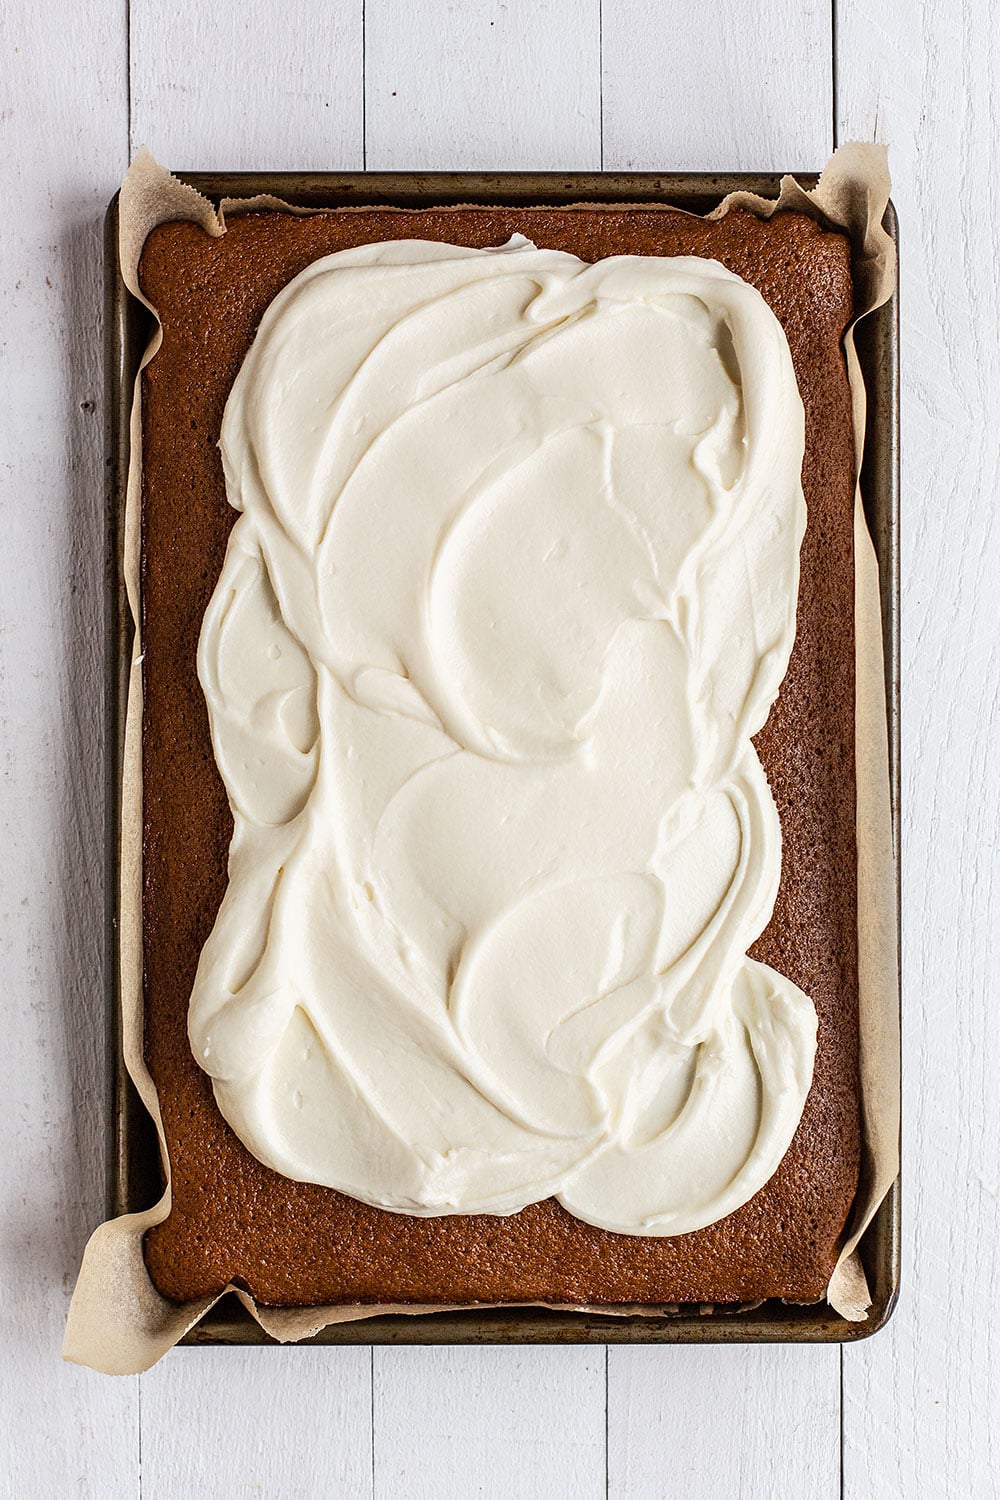 Gingerbread sheet cake in baking pan with cream cheese icing being spread on top